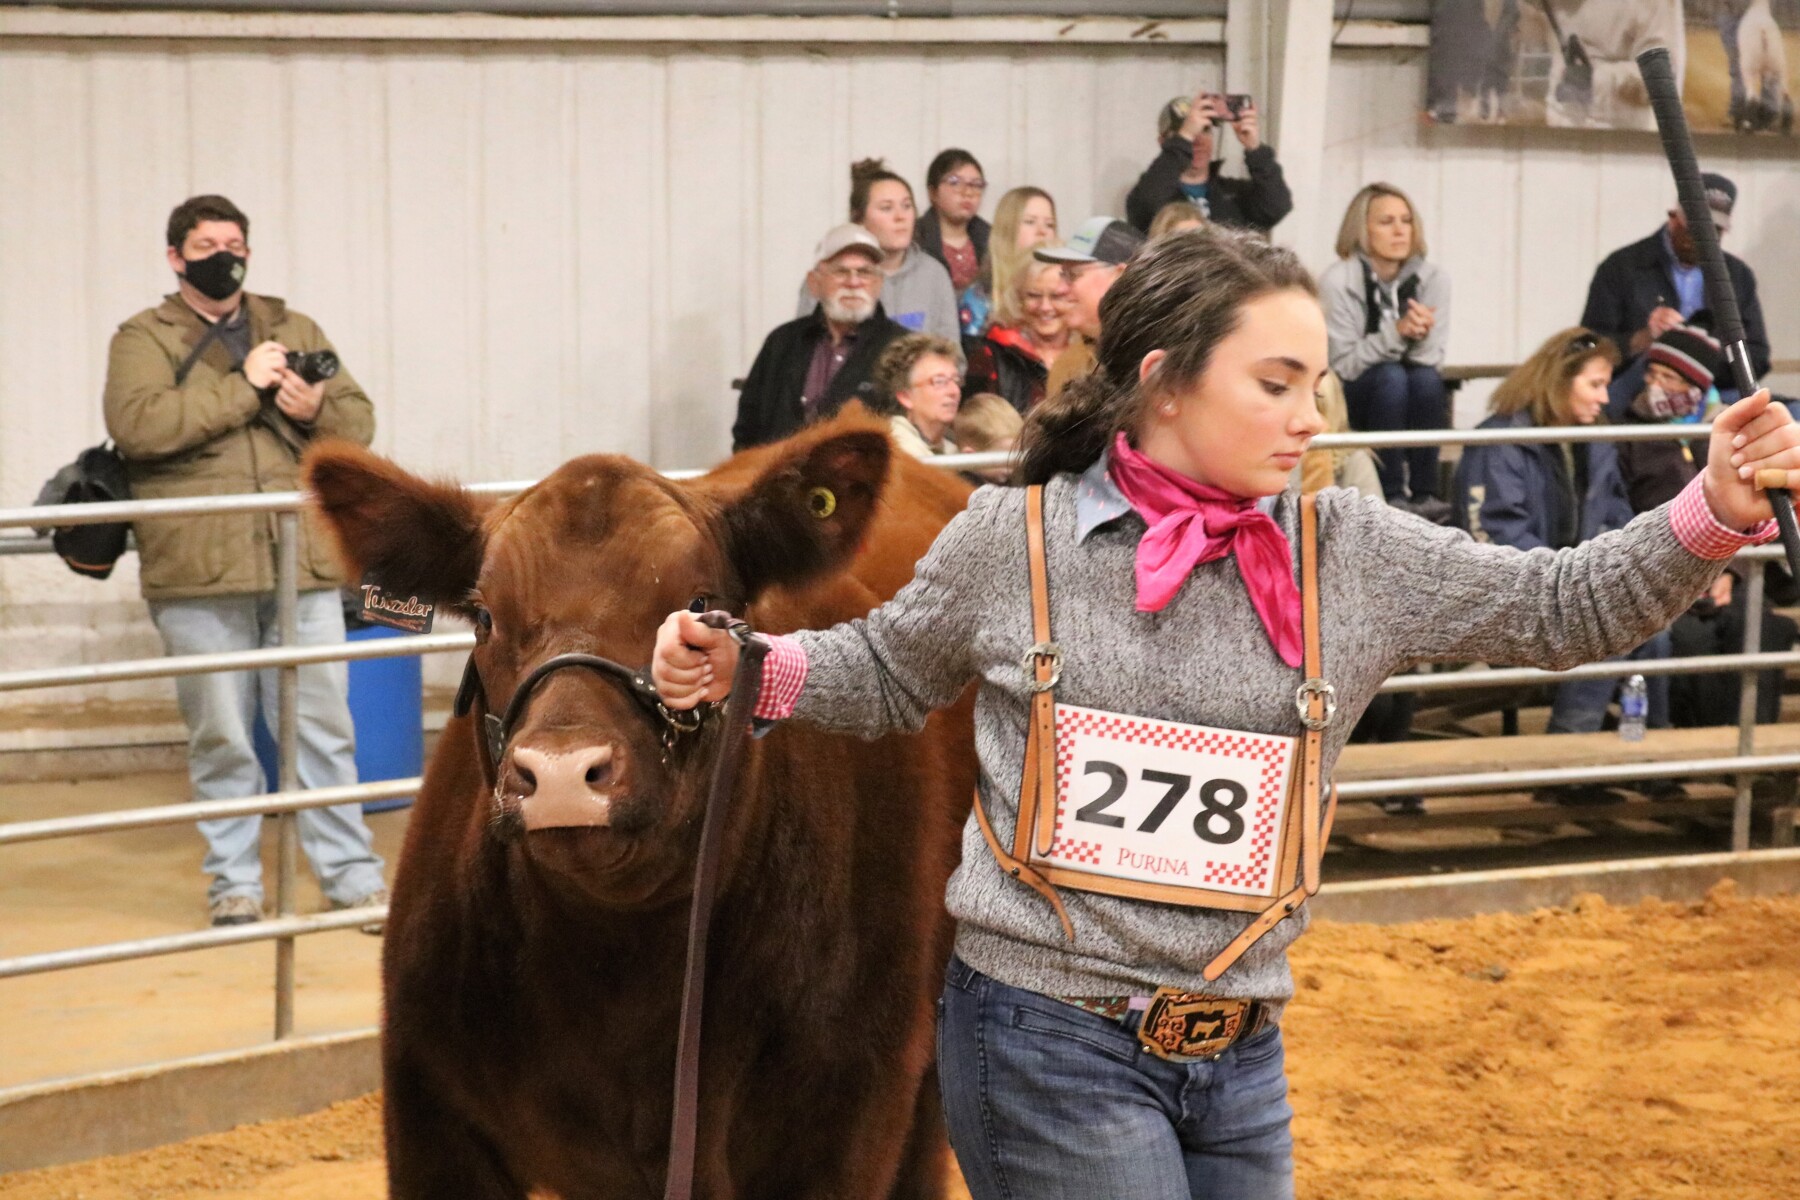 PHOTOS 2021 Erath County Jr. Livestock Show Beef Cattle The Flash